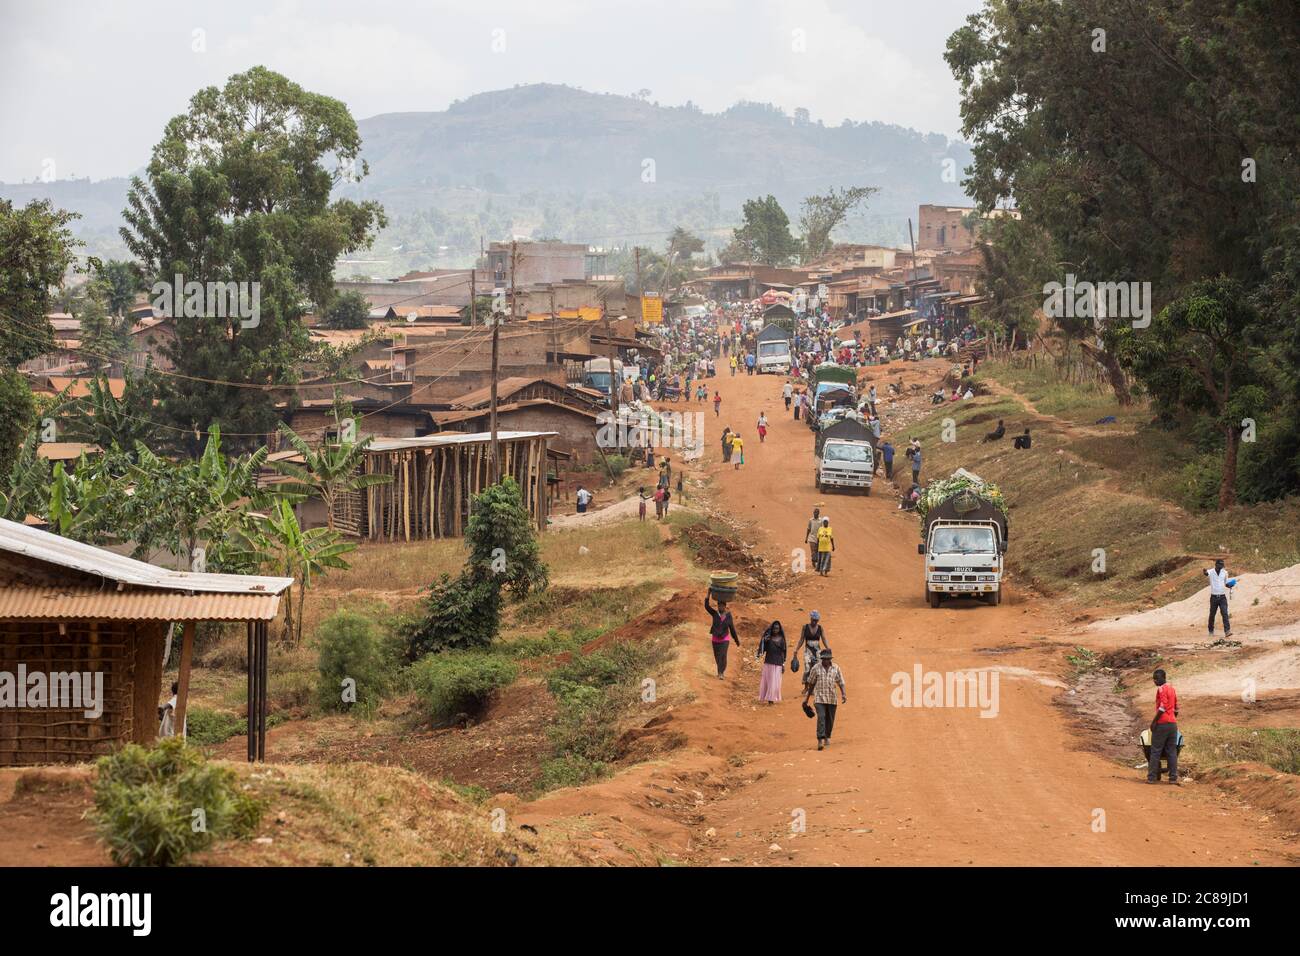 A dusty rural road leads to a busy mountain village on the foothills of Mount Elgon, in Eastern Uganda. Stock Photo